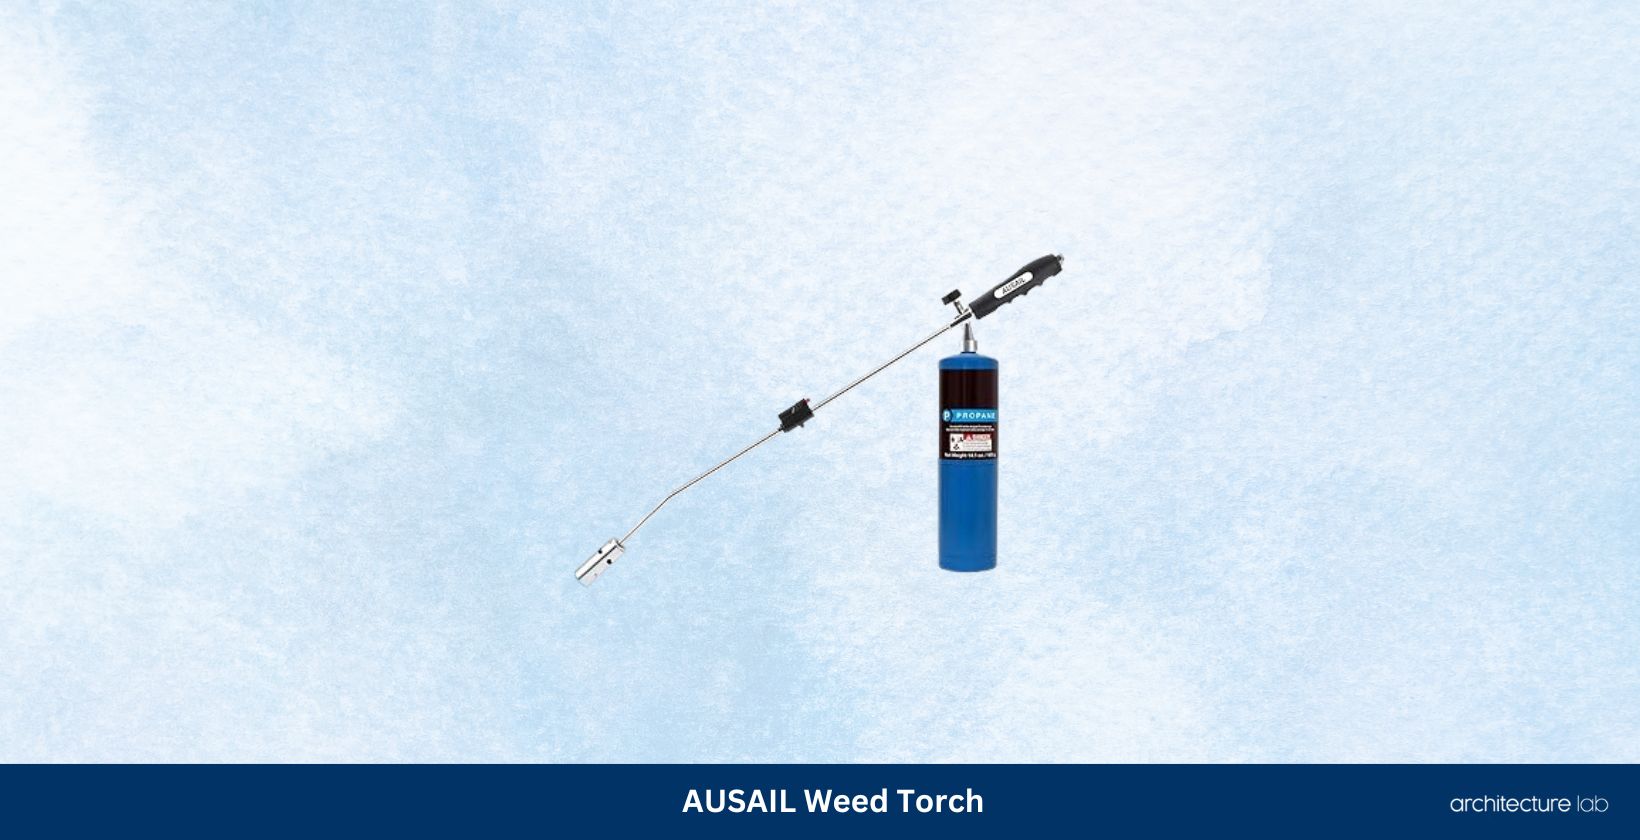 Ausail weed torch